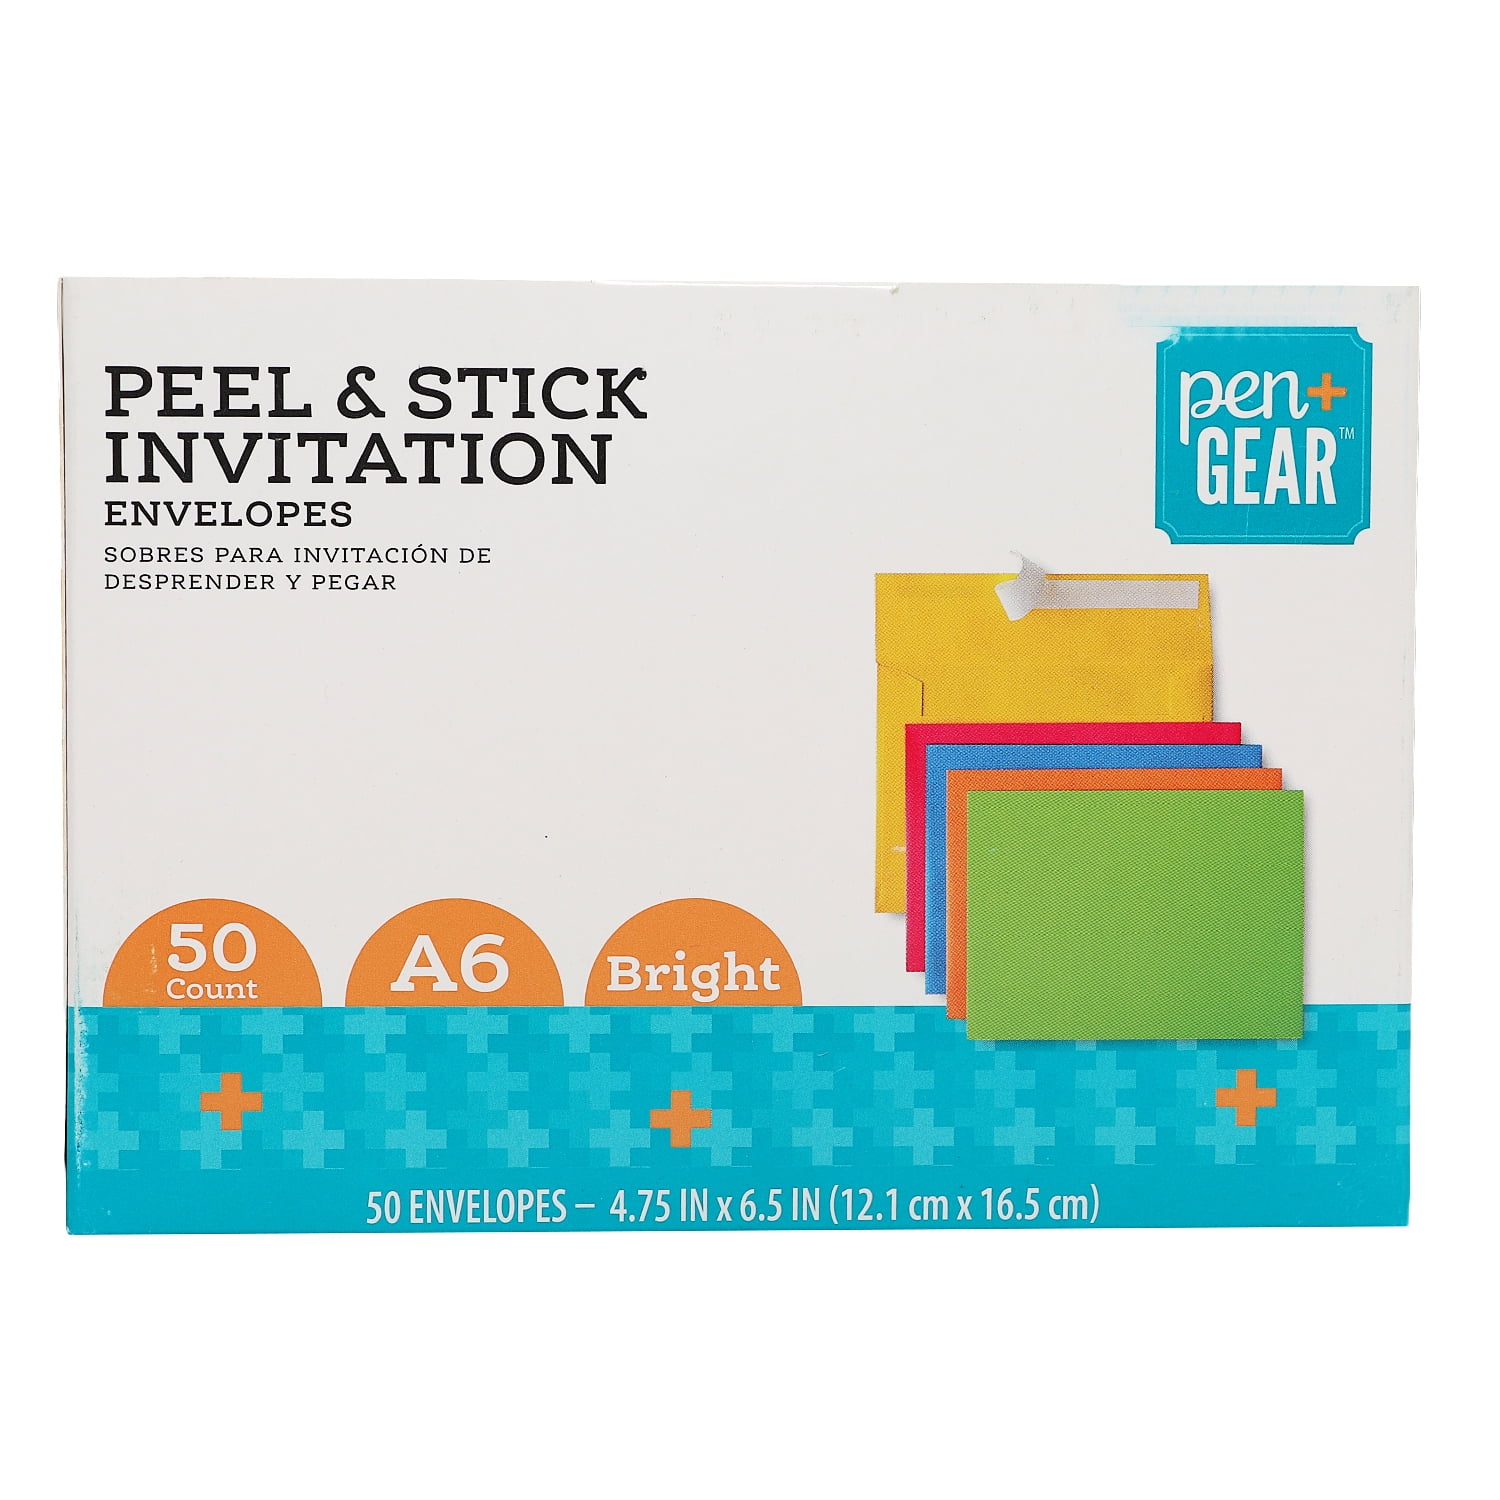 Pen + Gear Invite Envelopes, A6 4-3/4" x 6-1/6" Bright Colors, Peel and Stick, 50 Count Per Pack